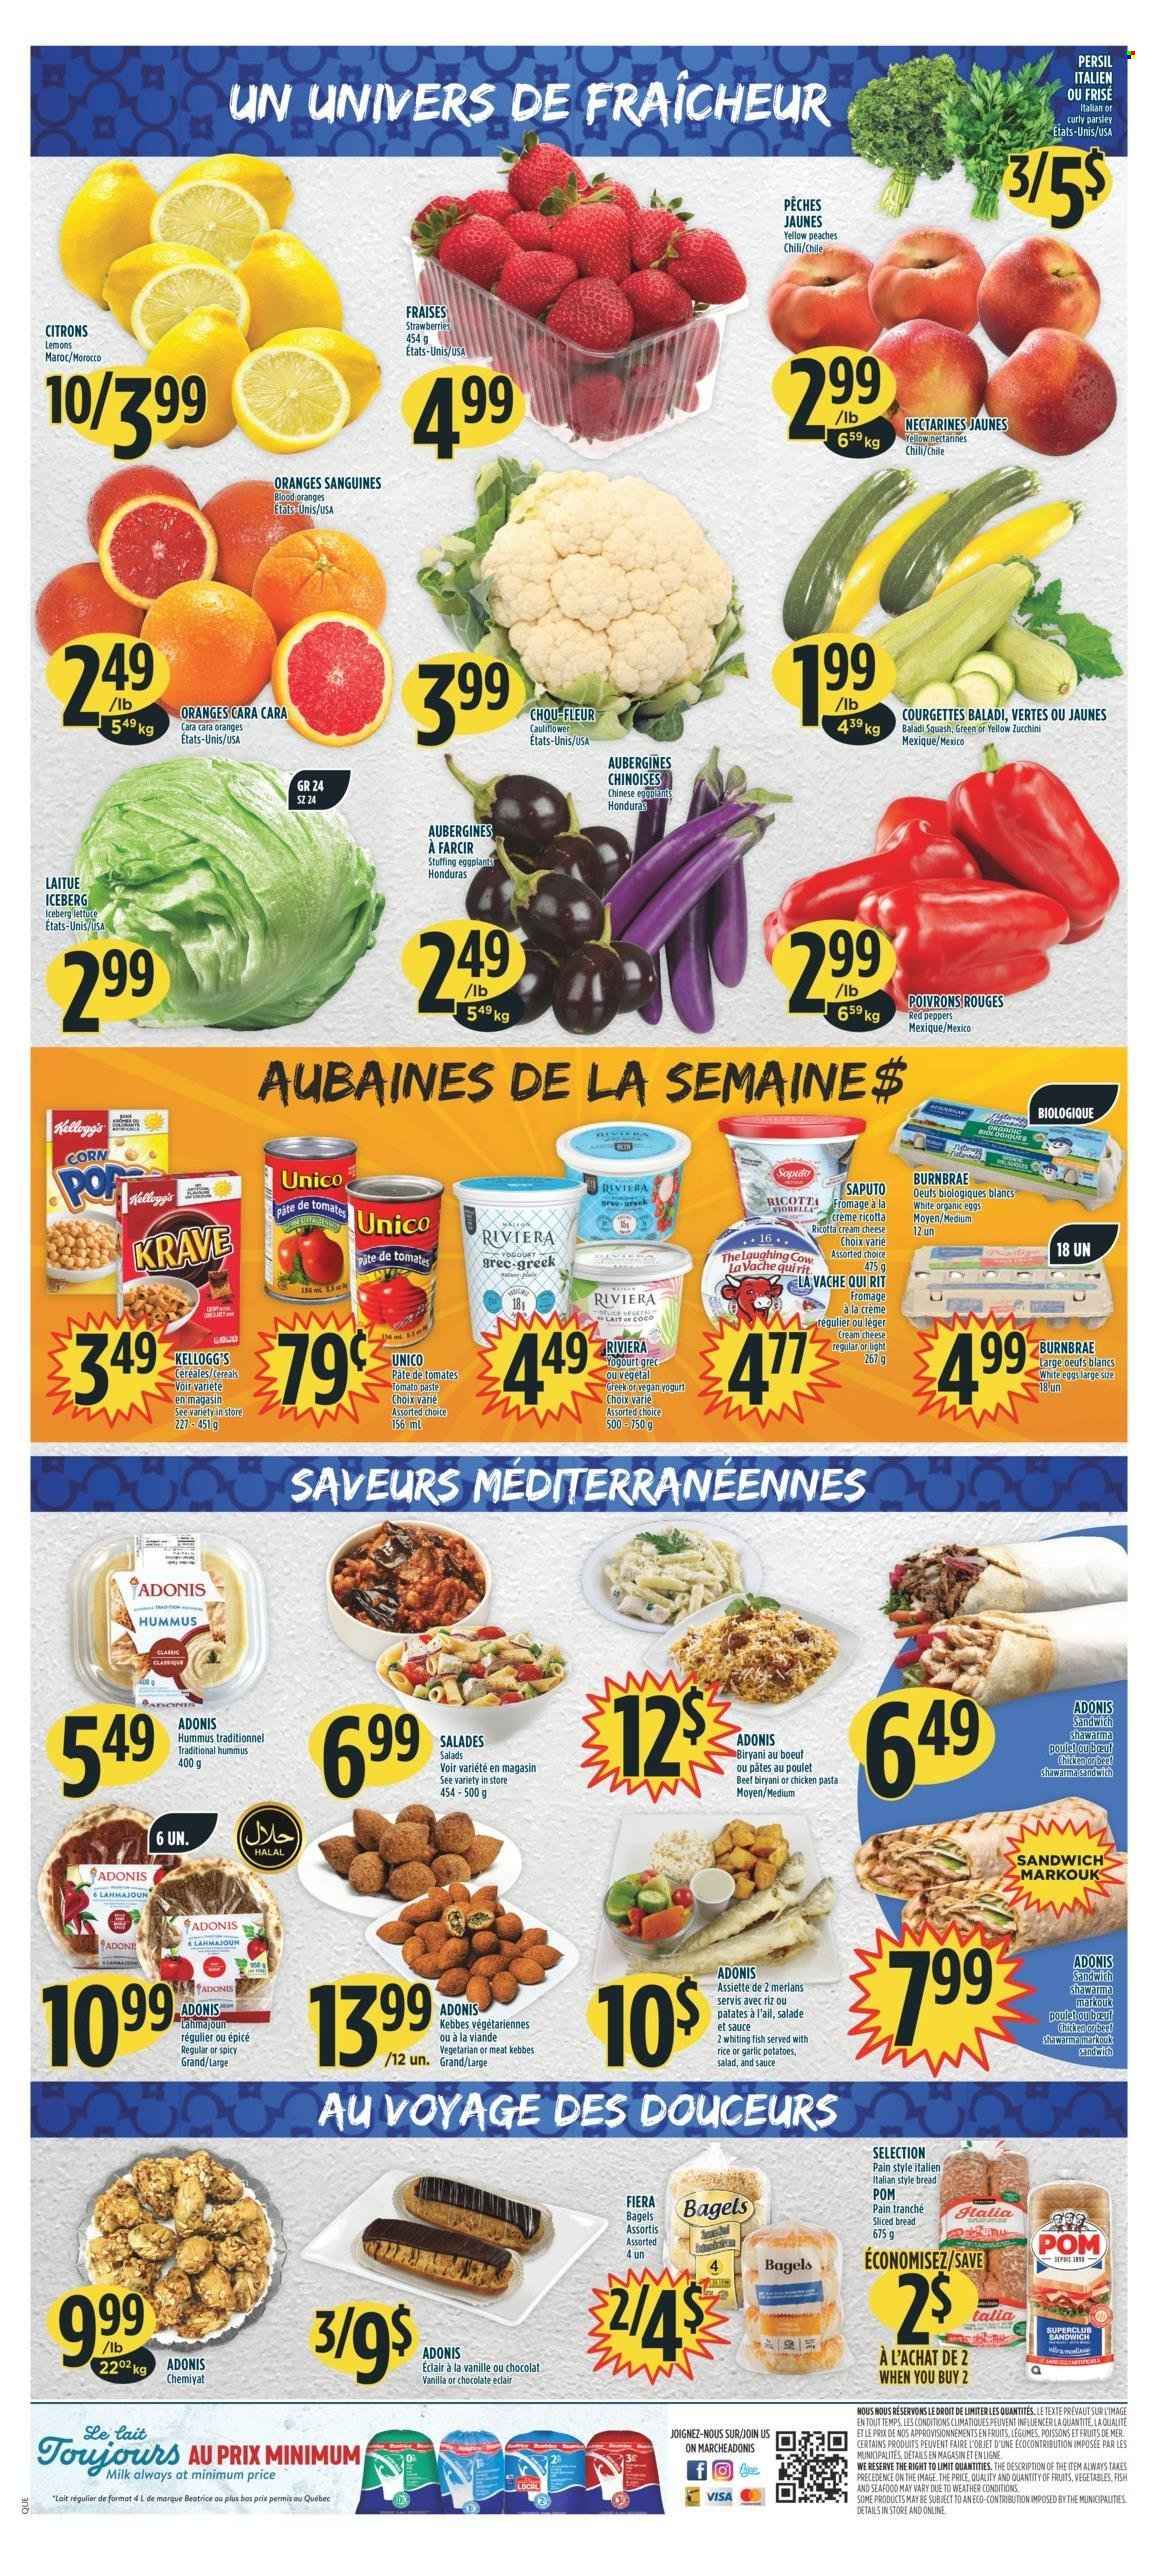 thumbnail - Adonis Flyer - January 26, 2023 - February 01, 2023 - Sales products - bagels, bread, cauliflower, corn, garlic, zucchini, potatoes, parsley, lettuce, peppers, eggplant, red peppers, nectarines, strawberries, oranges, lemons, peaches, seafood, whiting, sandwich, pasta, sauce, hummus, cheese, The Laughing Cow, yoghurt, milk, eggs, Kellogg's, tomato paste, Persil, ricotta. Page 2.